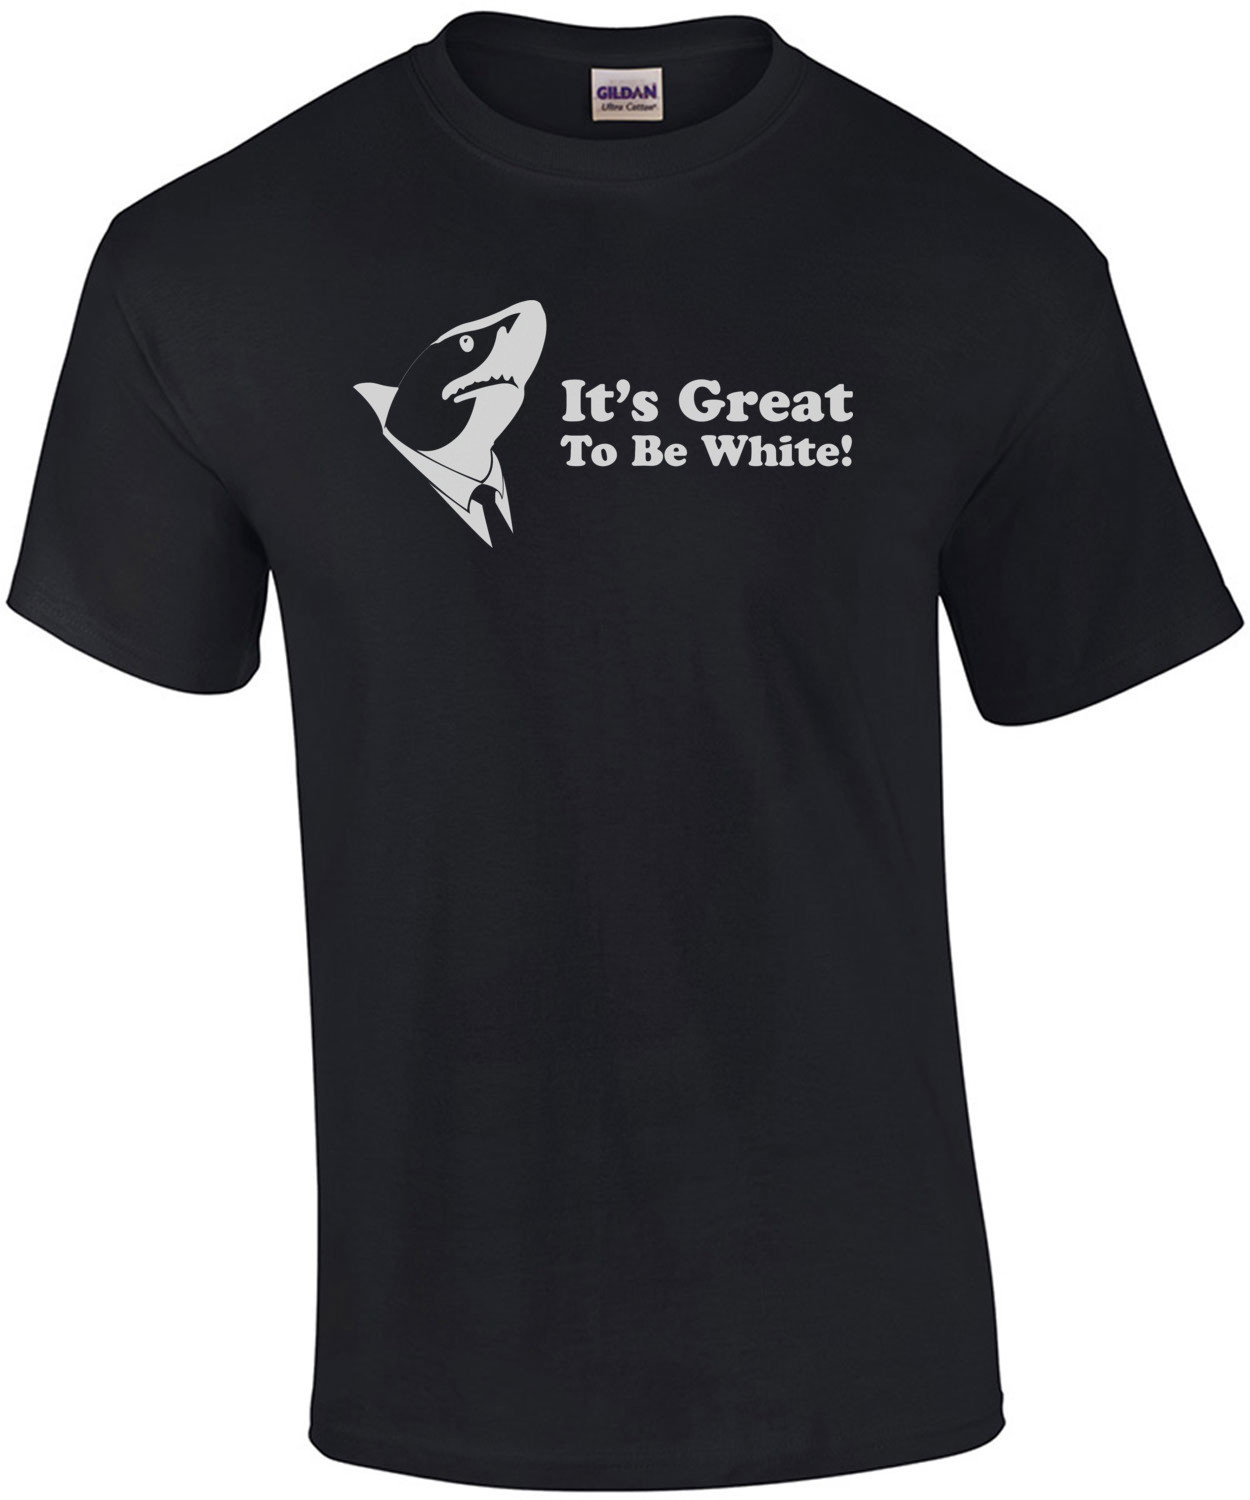 It's Great To Be White - Great White T-Shirt